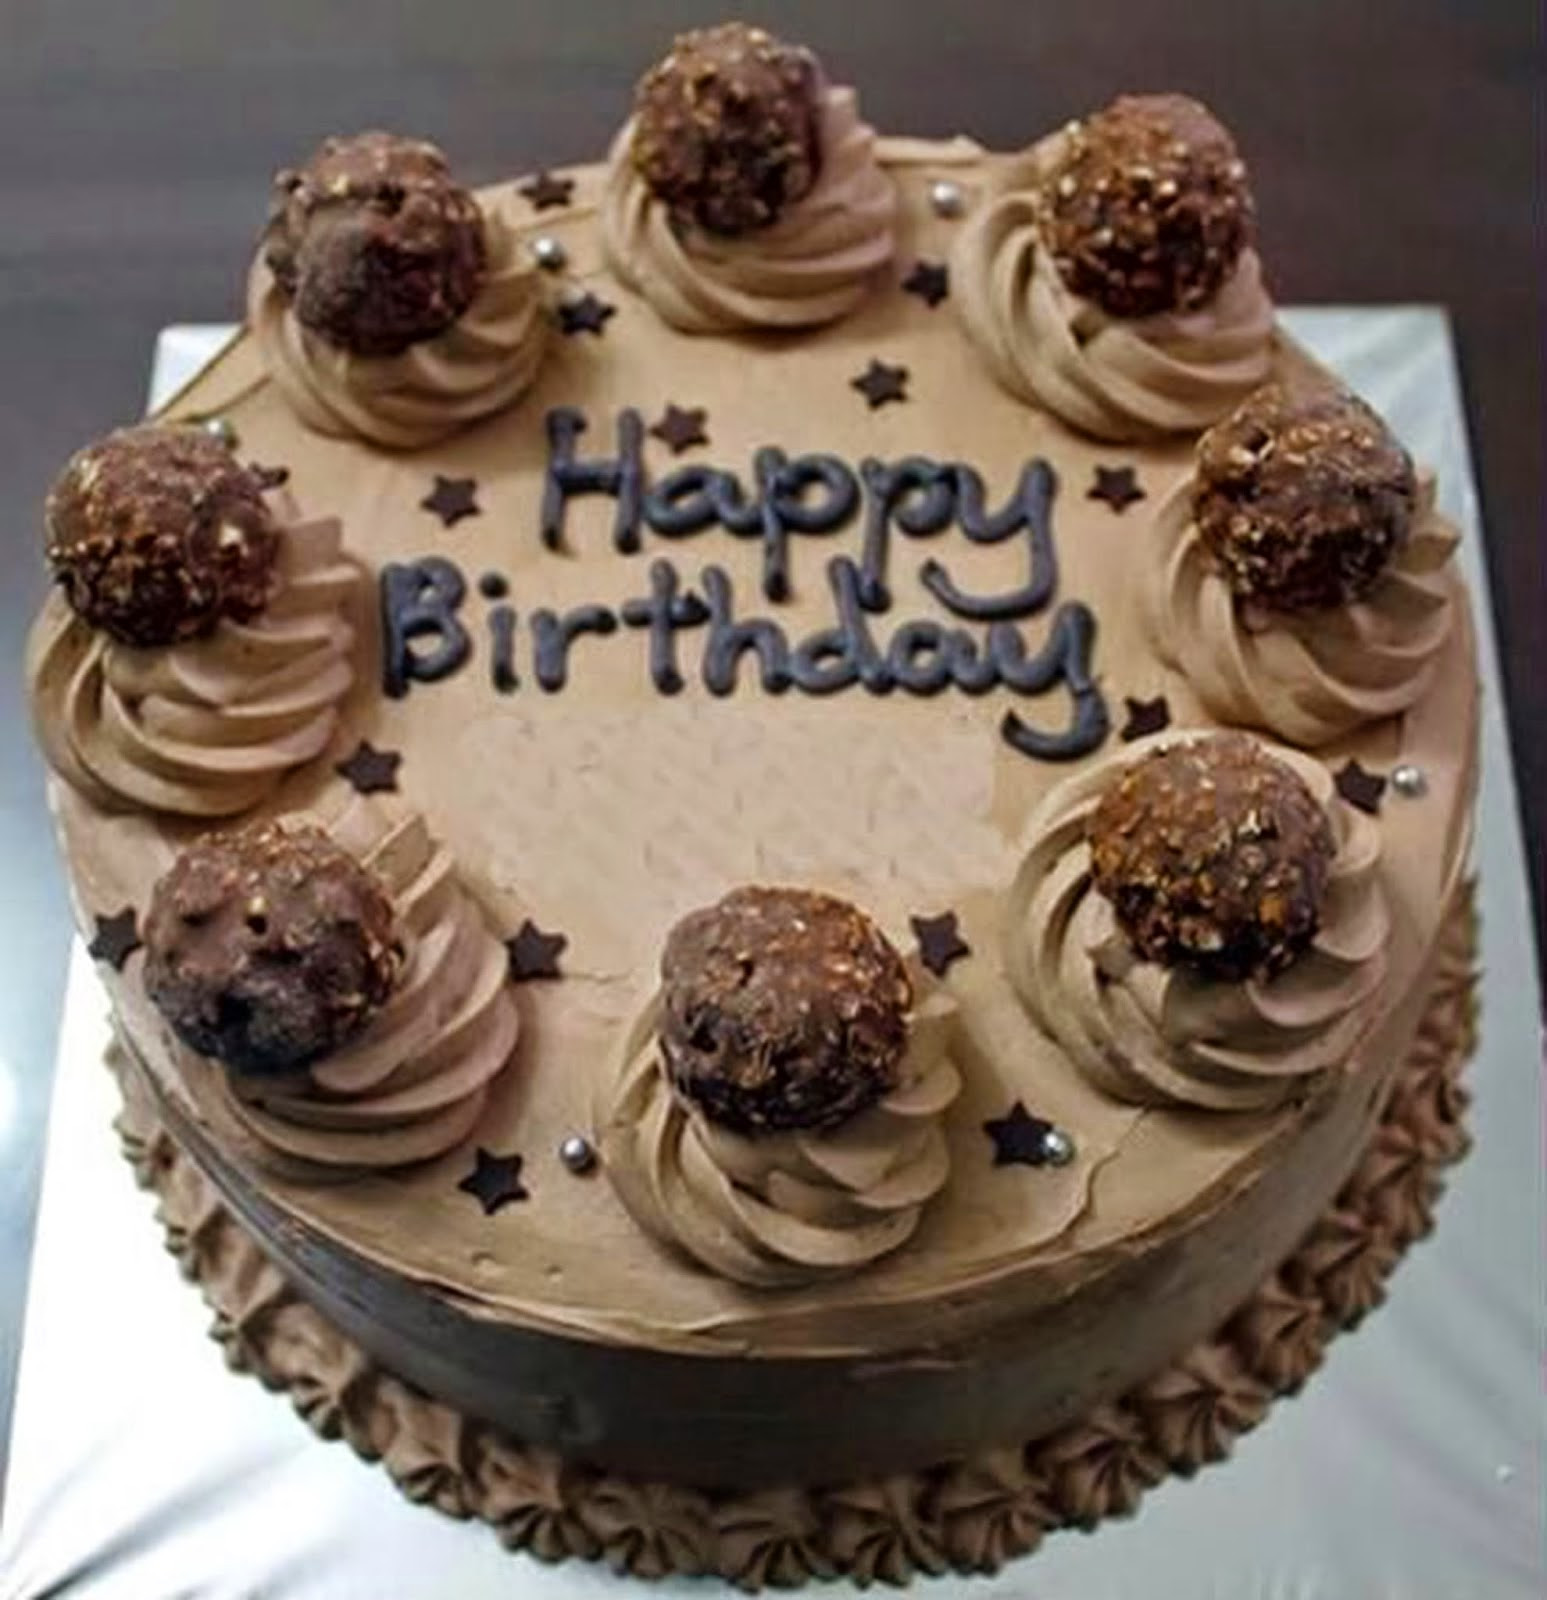 15 Happy Bday Chocolate Cake
 You Can Make In 5 Minutes